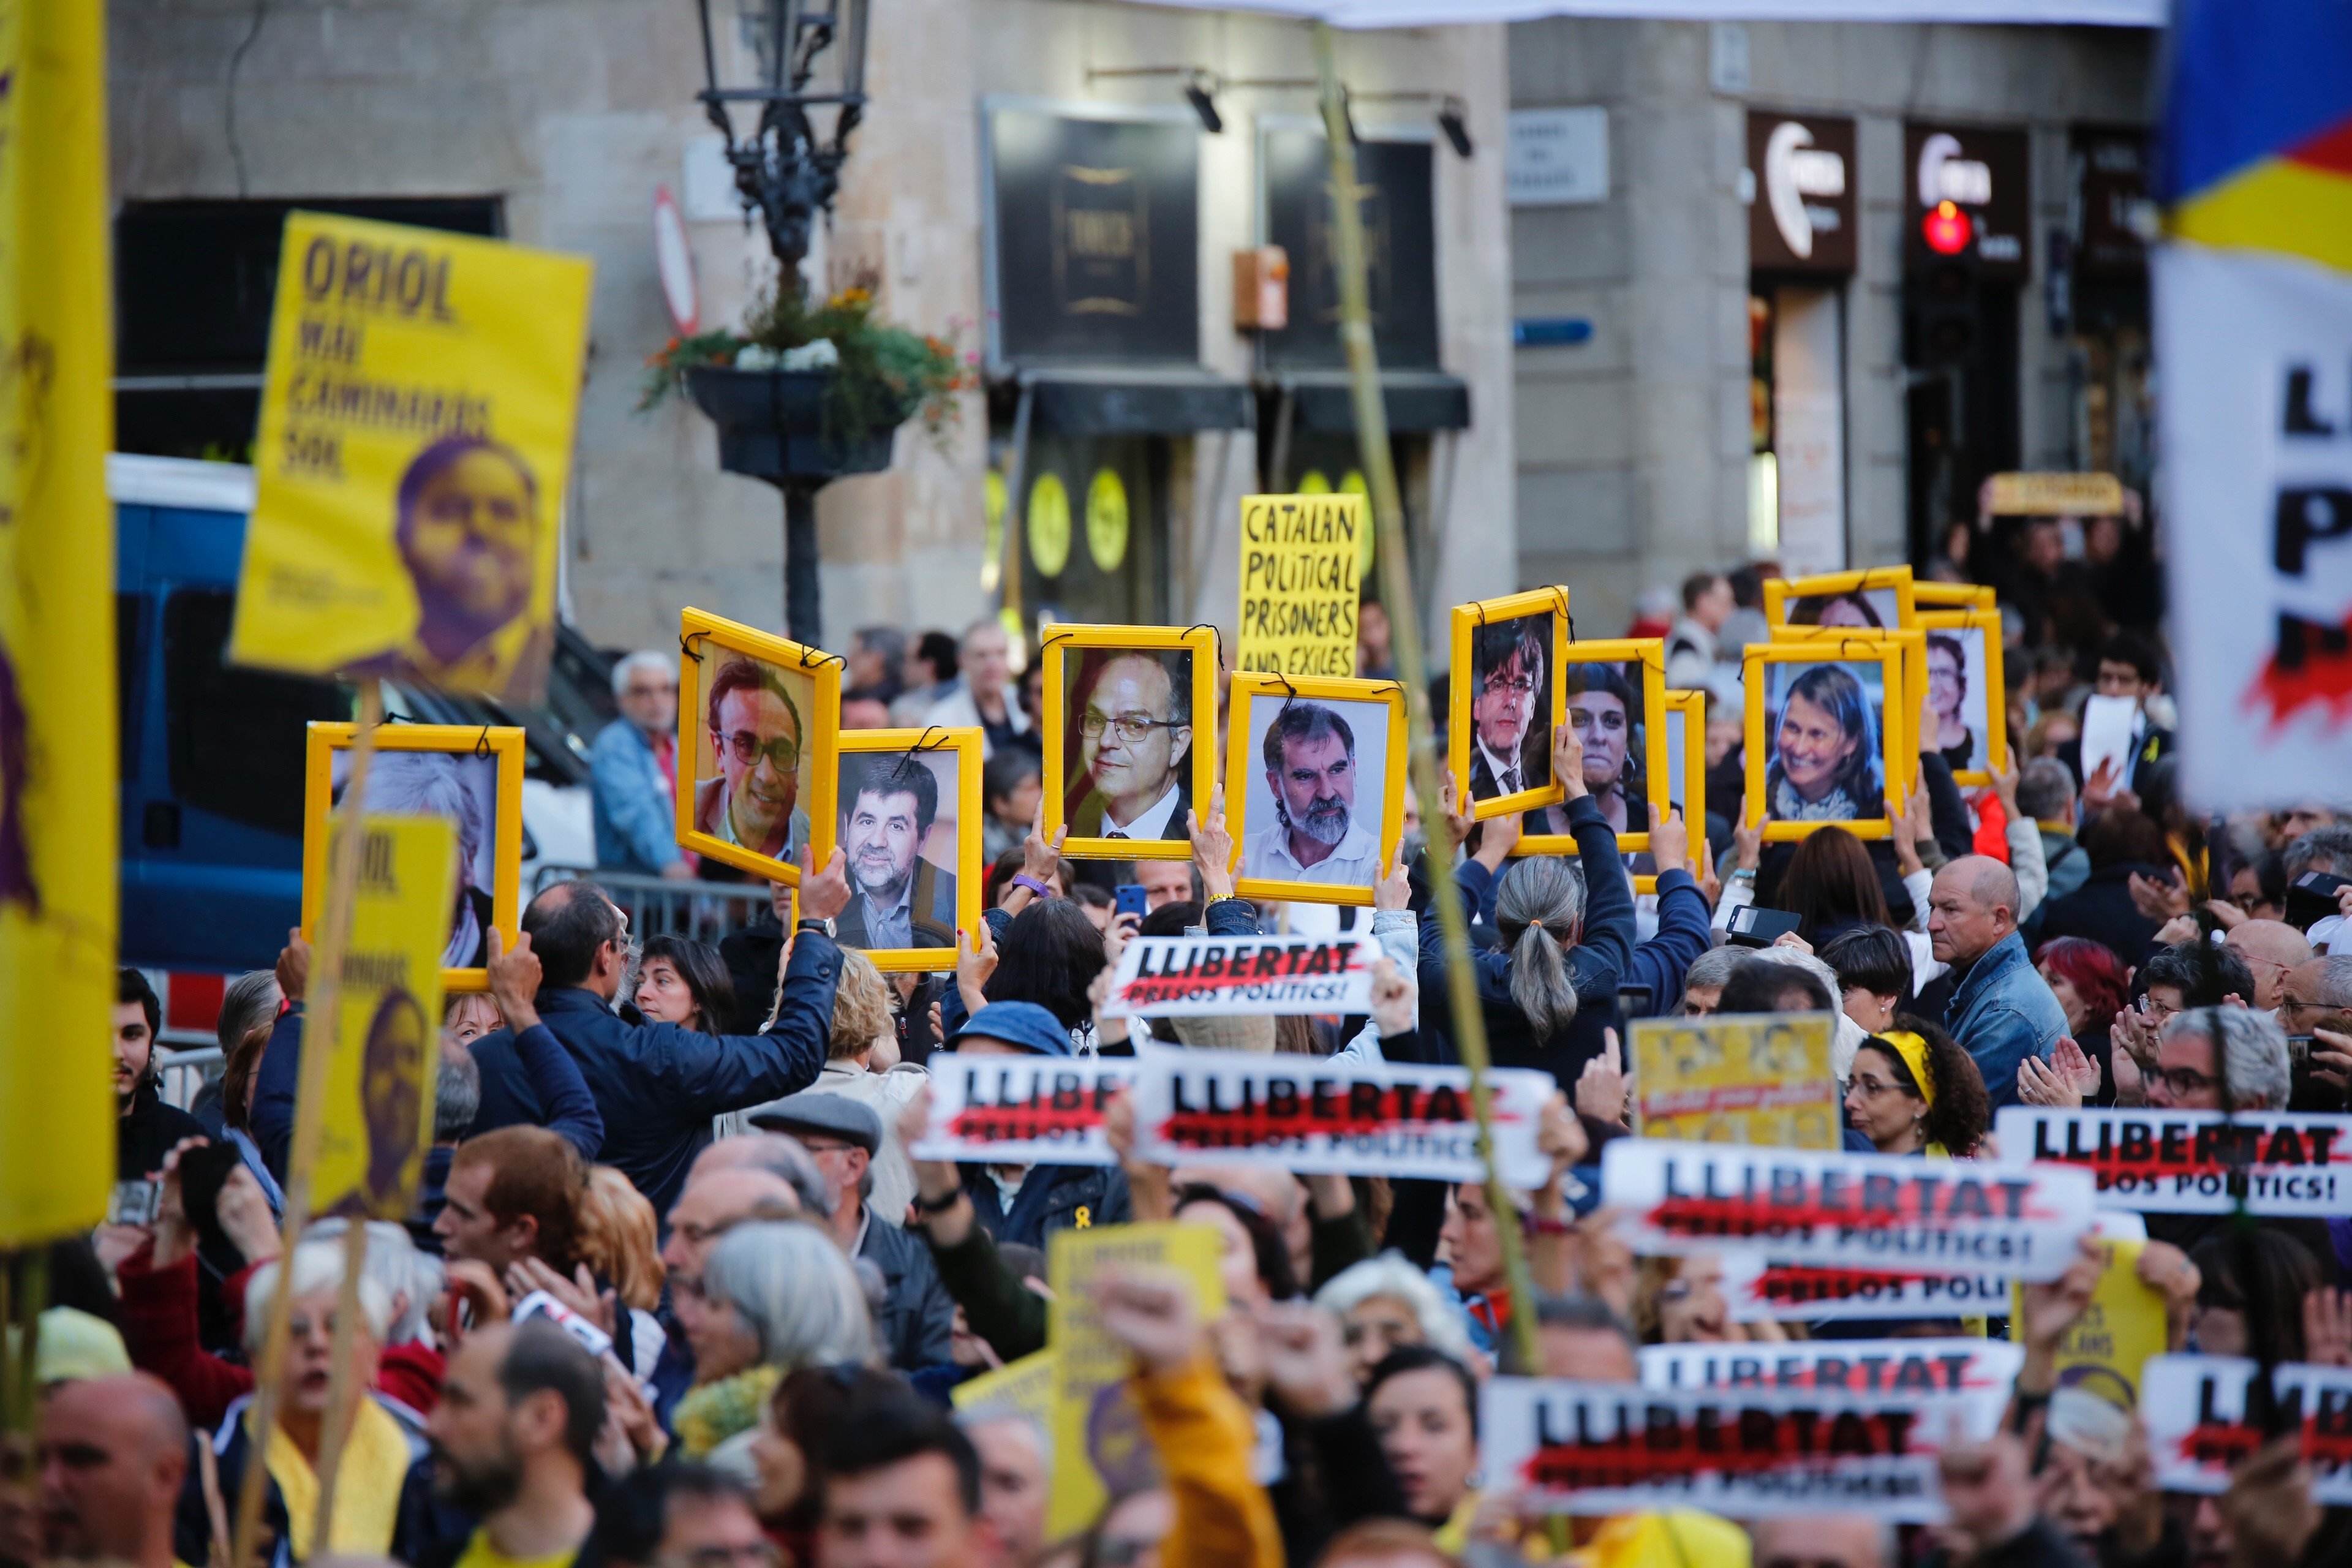 Effects of article 155 intervention in Catalonia: 259 fired, 7 in exile, 9 in prison